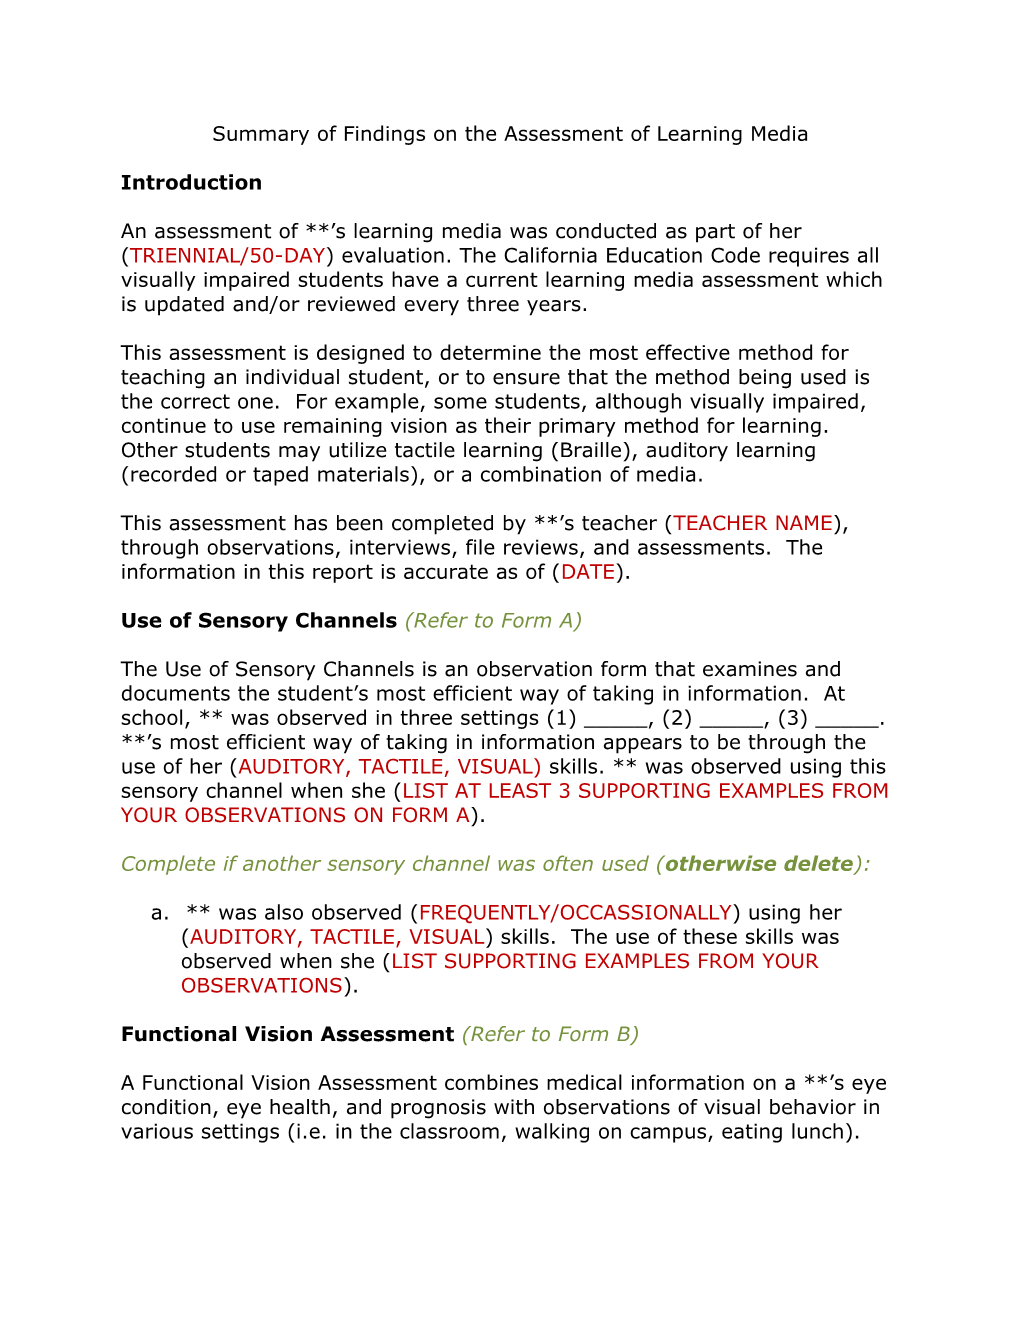 Summary of Findings on the Assessment of Learning Media